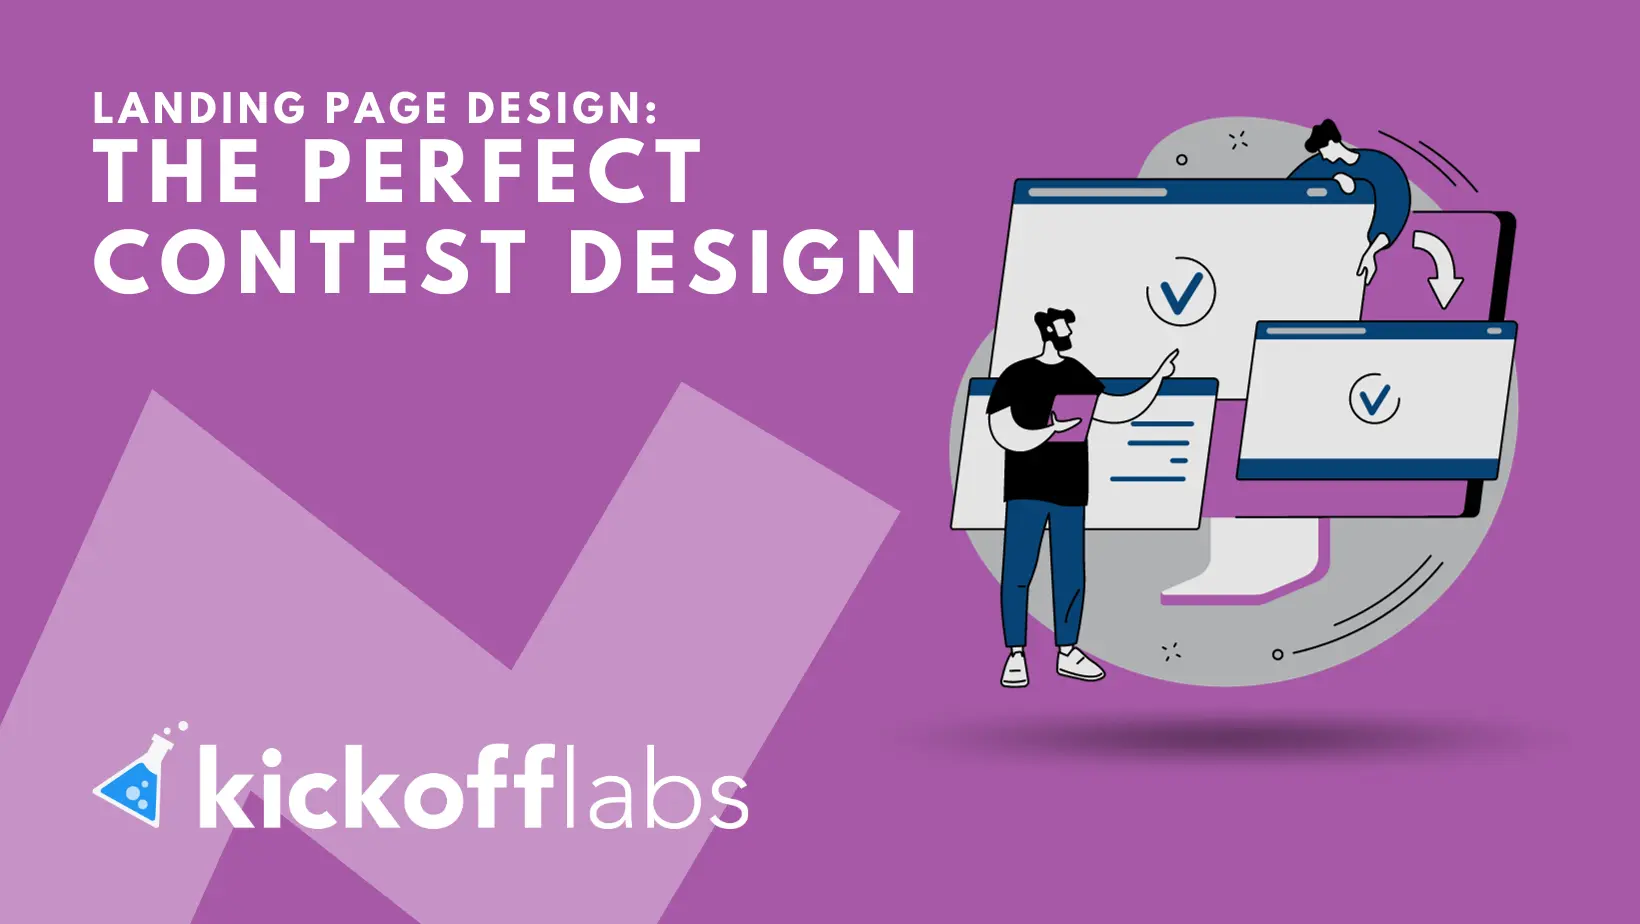 How to Design the Perfect Contest Landing Page